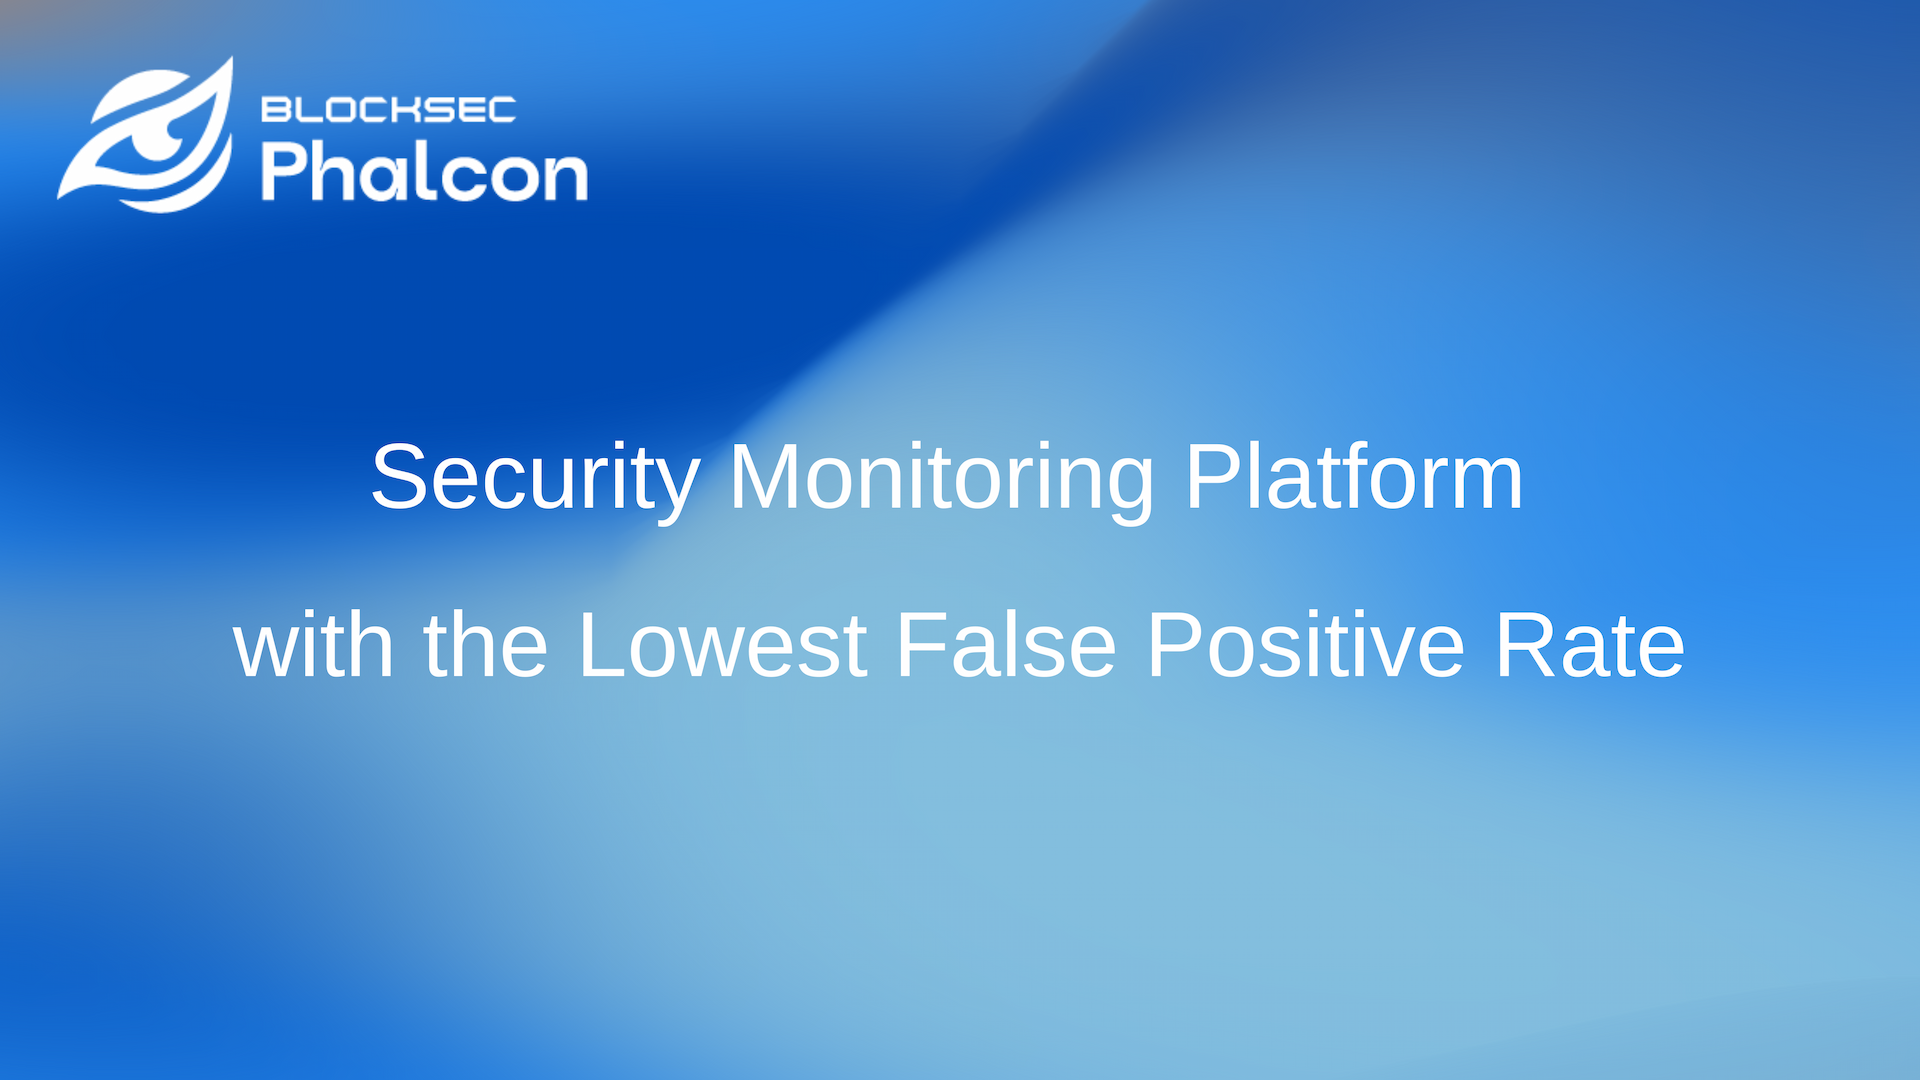 Blockchain Transaction Security Monitoring Tool with the Lowest False Positive Rate